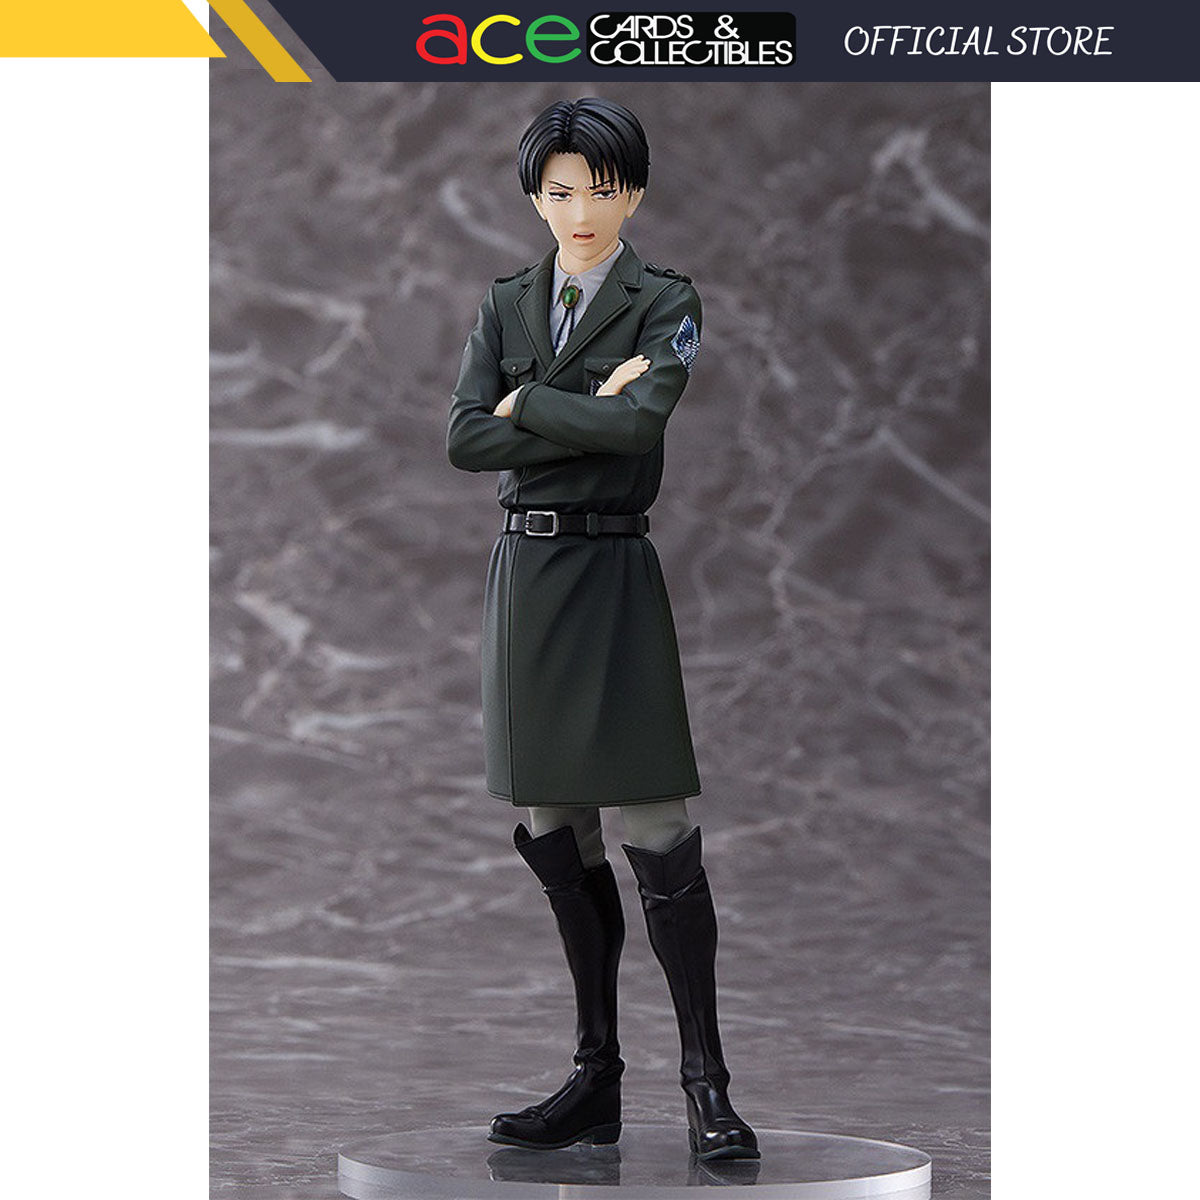 Attack on Titan Pop Up Parade "Levi" (Dark Color Ver.)-Good Smile Company-Ace Cards & Collectibles